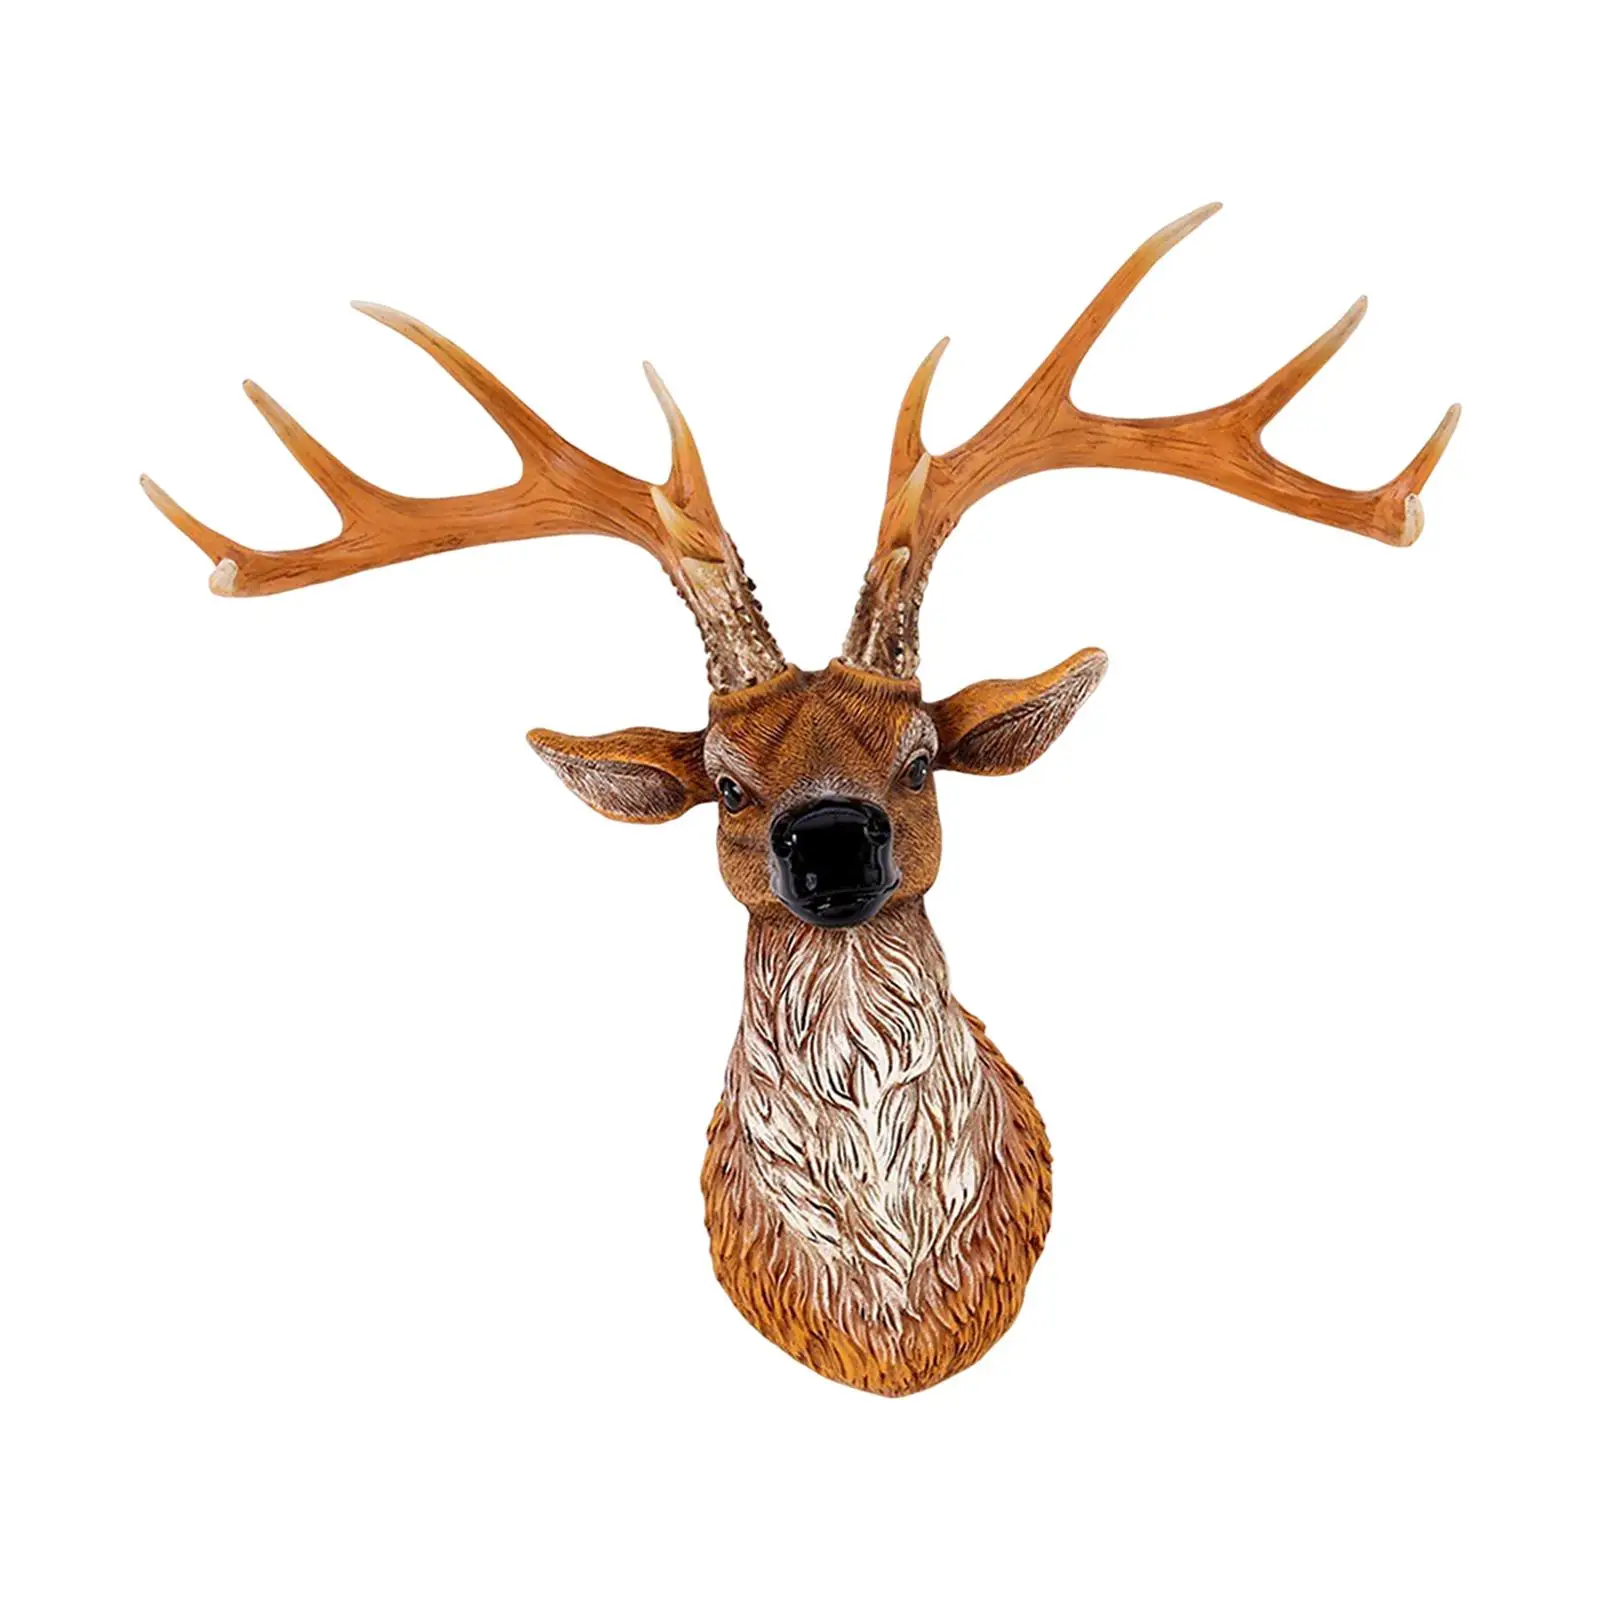 

Wall Mounted Deer Head Sculpture decor resin Figurines Ornament for Gallery Farmhouse Dinning Room Office Artwork